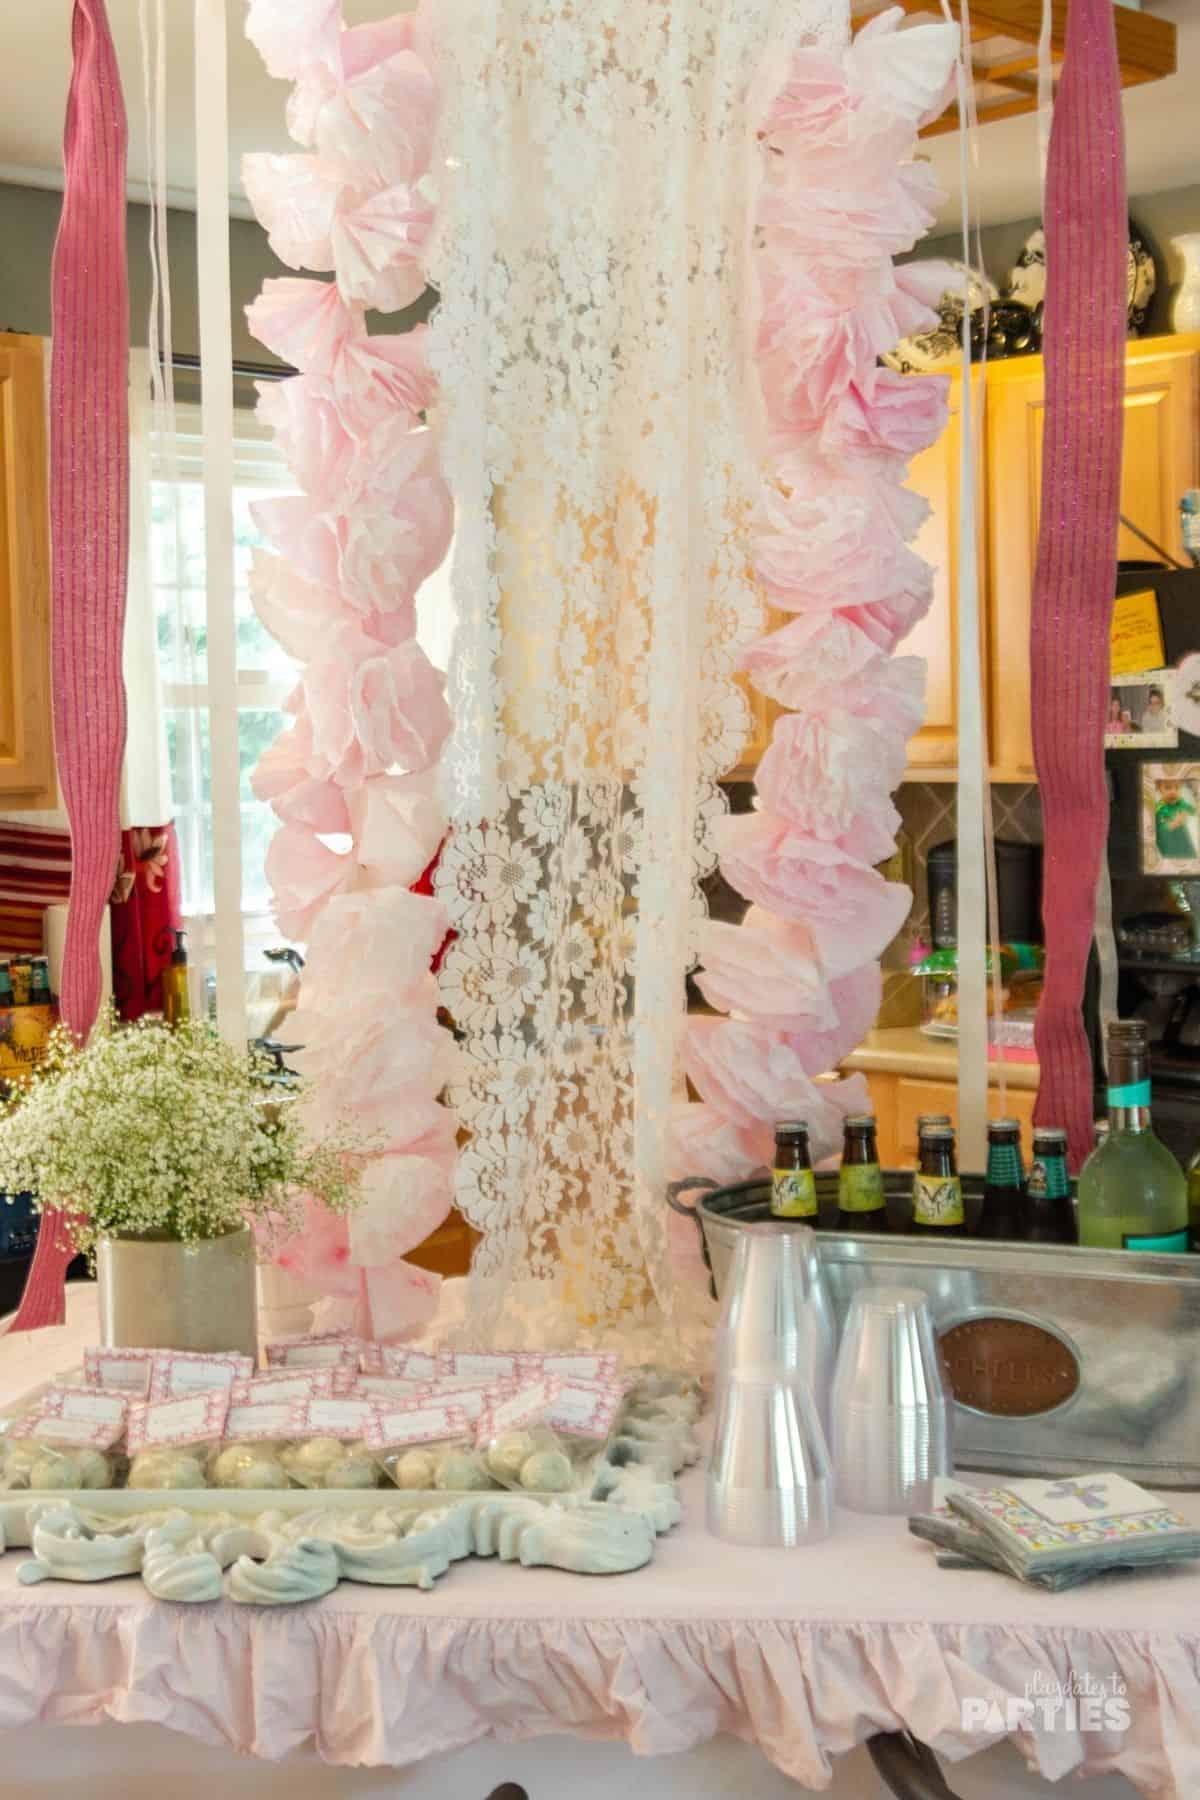 Pink ribbons and lace hang from the ceiling as a bacdrop behind the party drinks and favors.